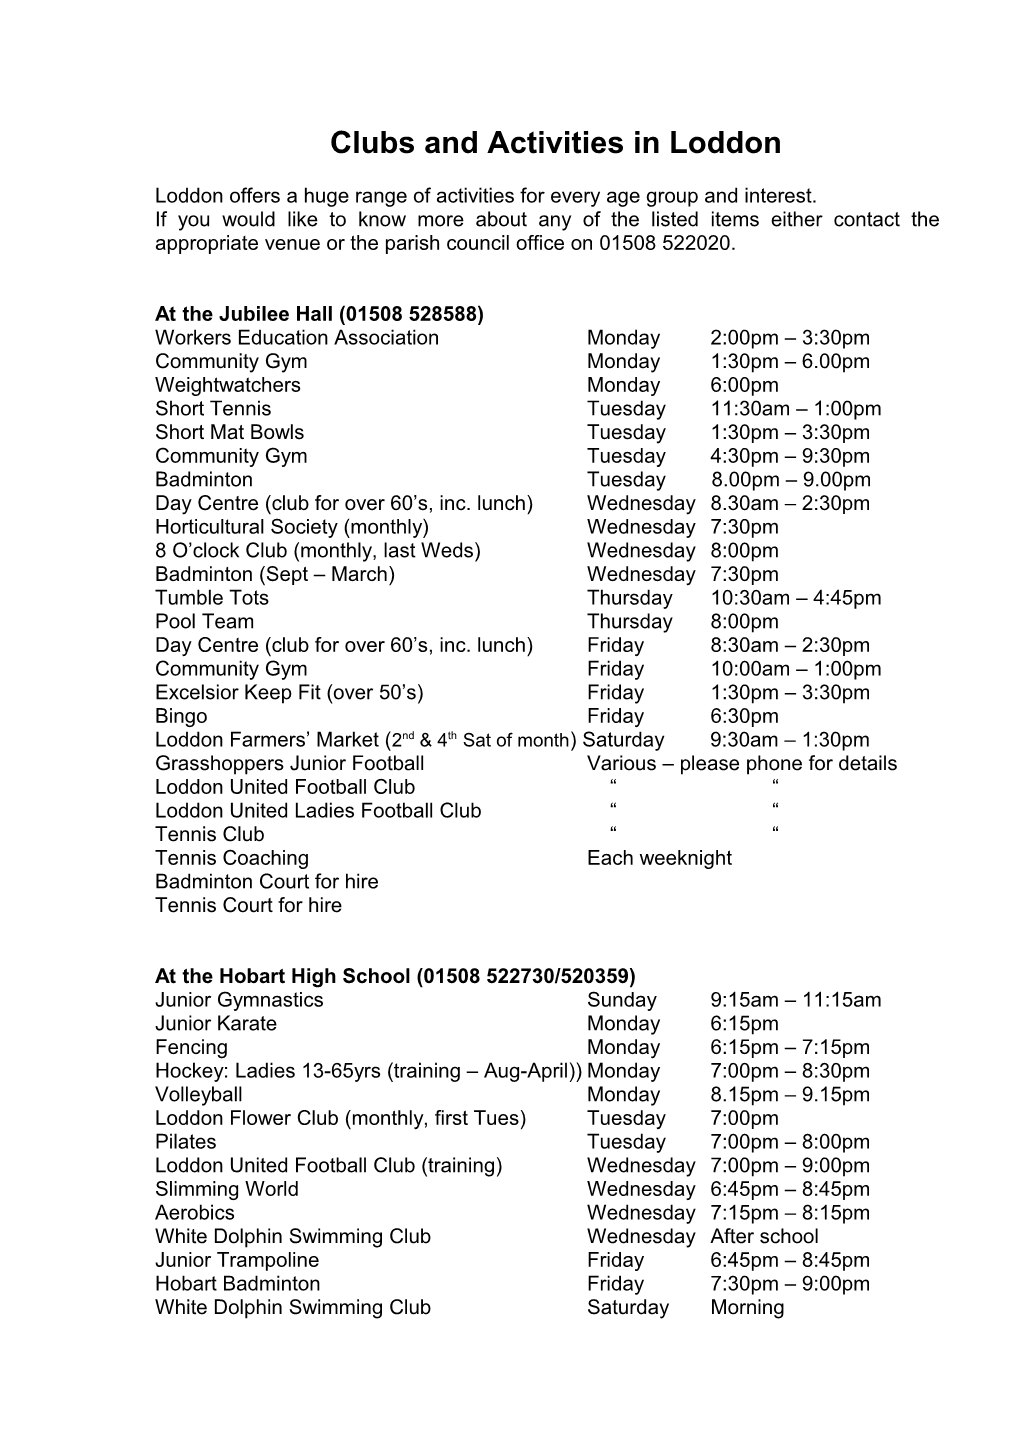 Clubs and Activities in Loddon Spring 2011